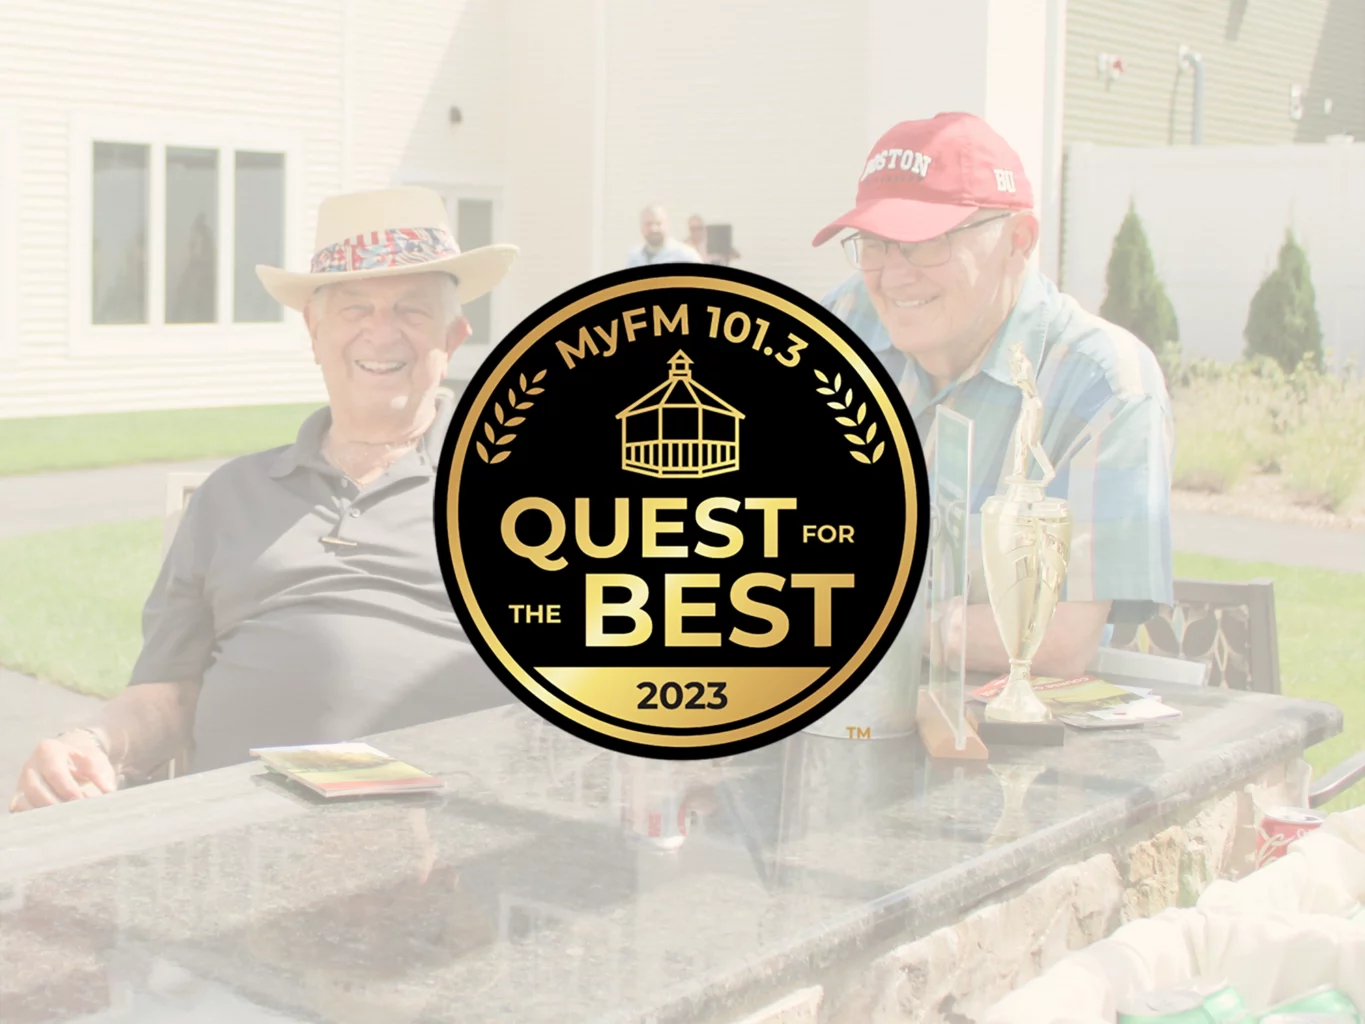 MyFM Quest for the Best 2023